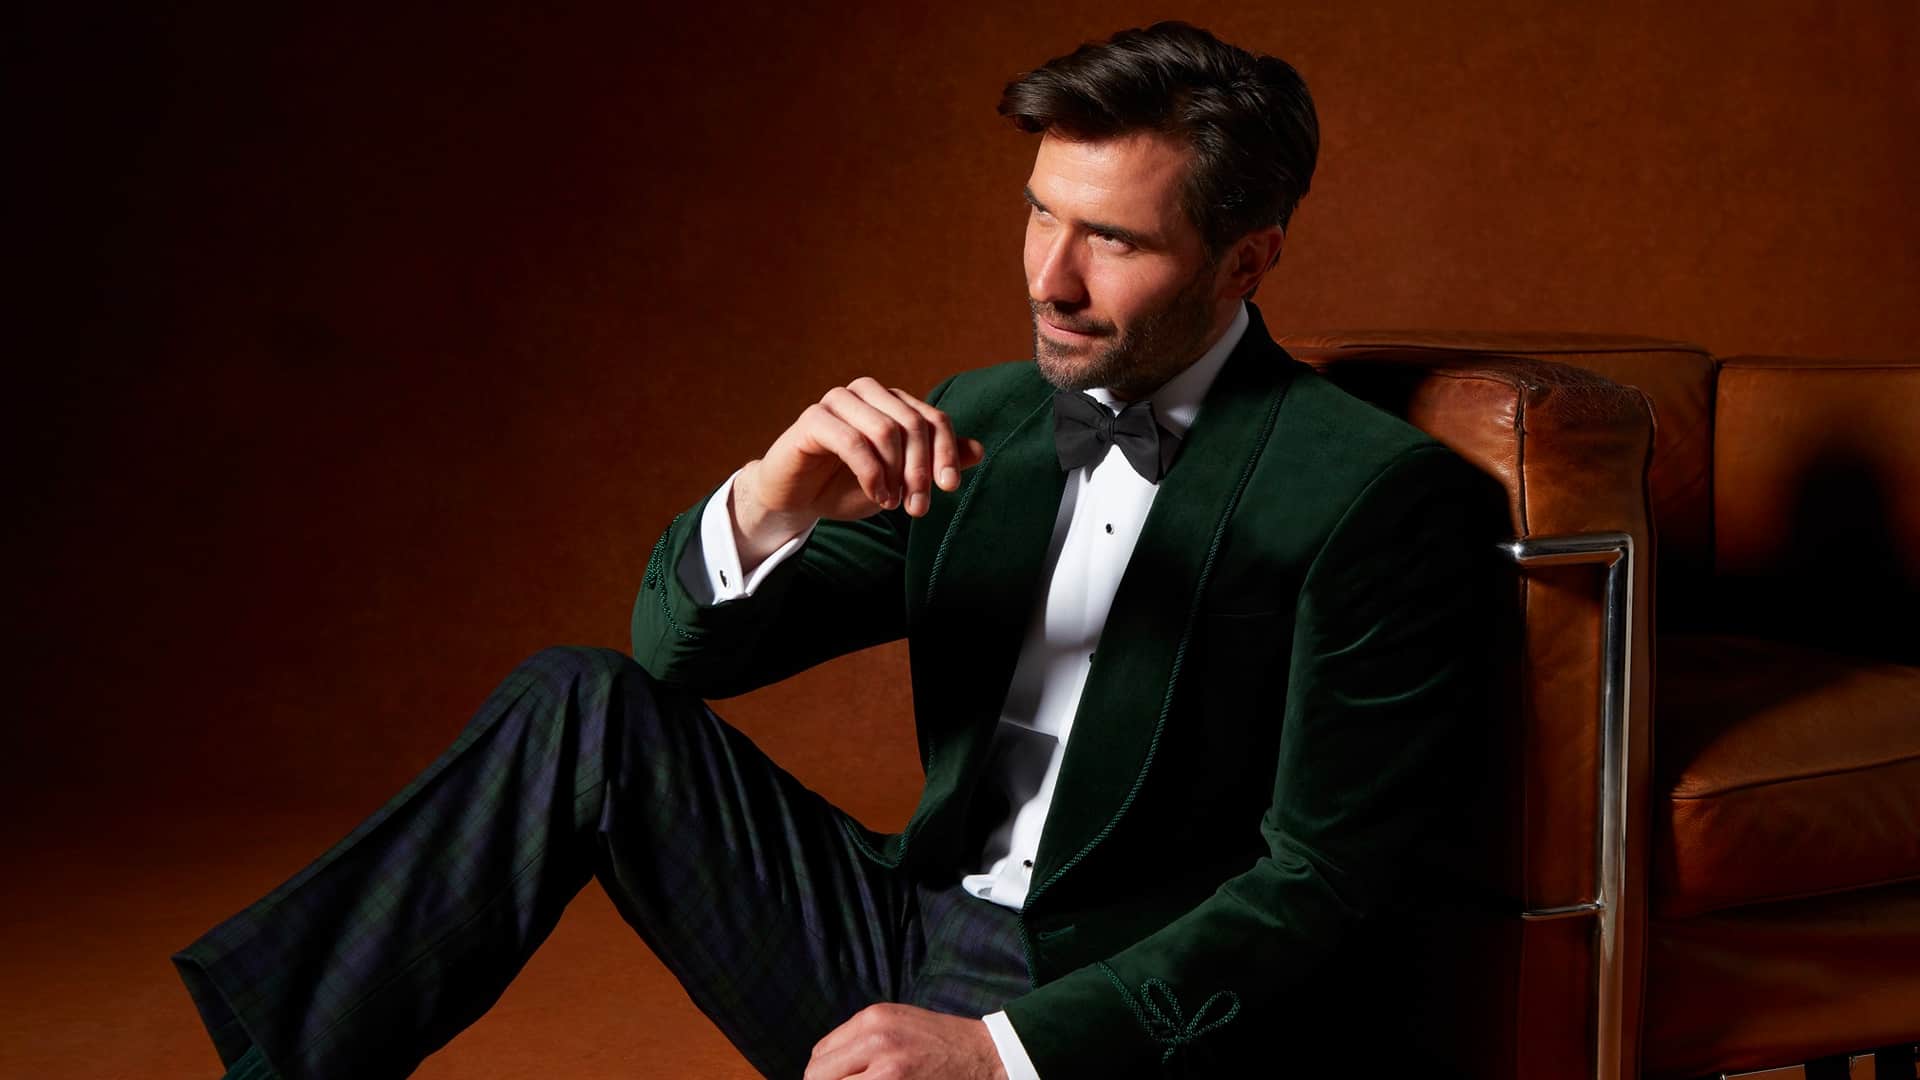 The Smoking Jacket: What Is & Why You Buy One